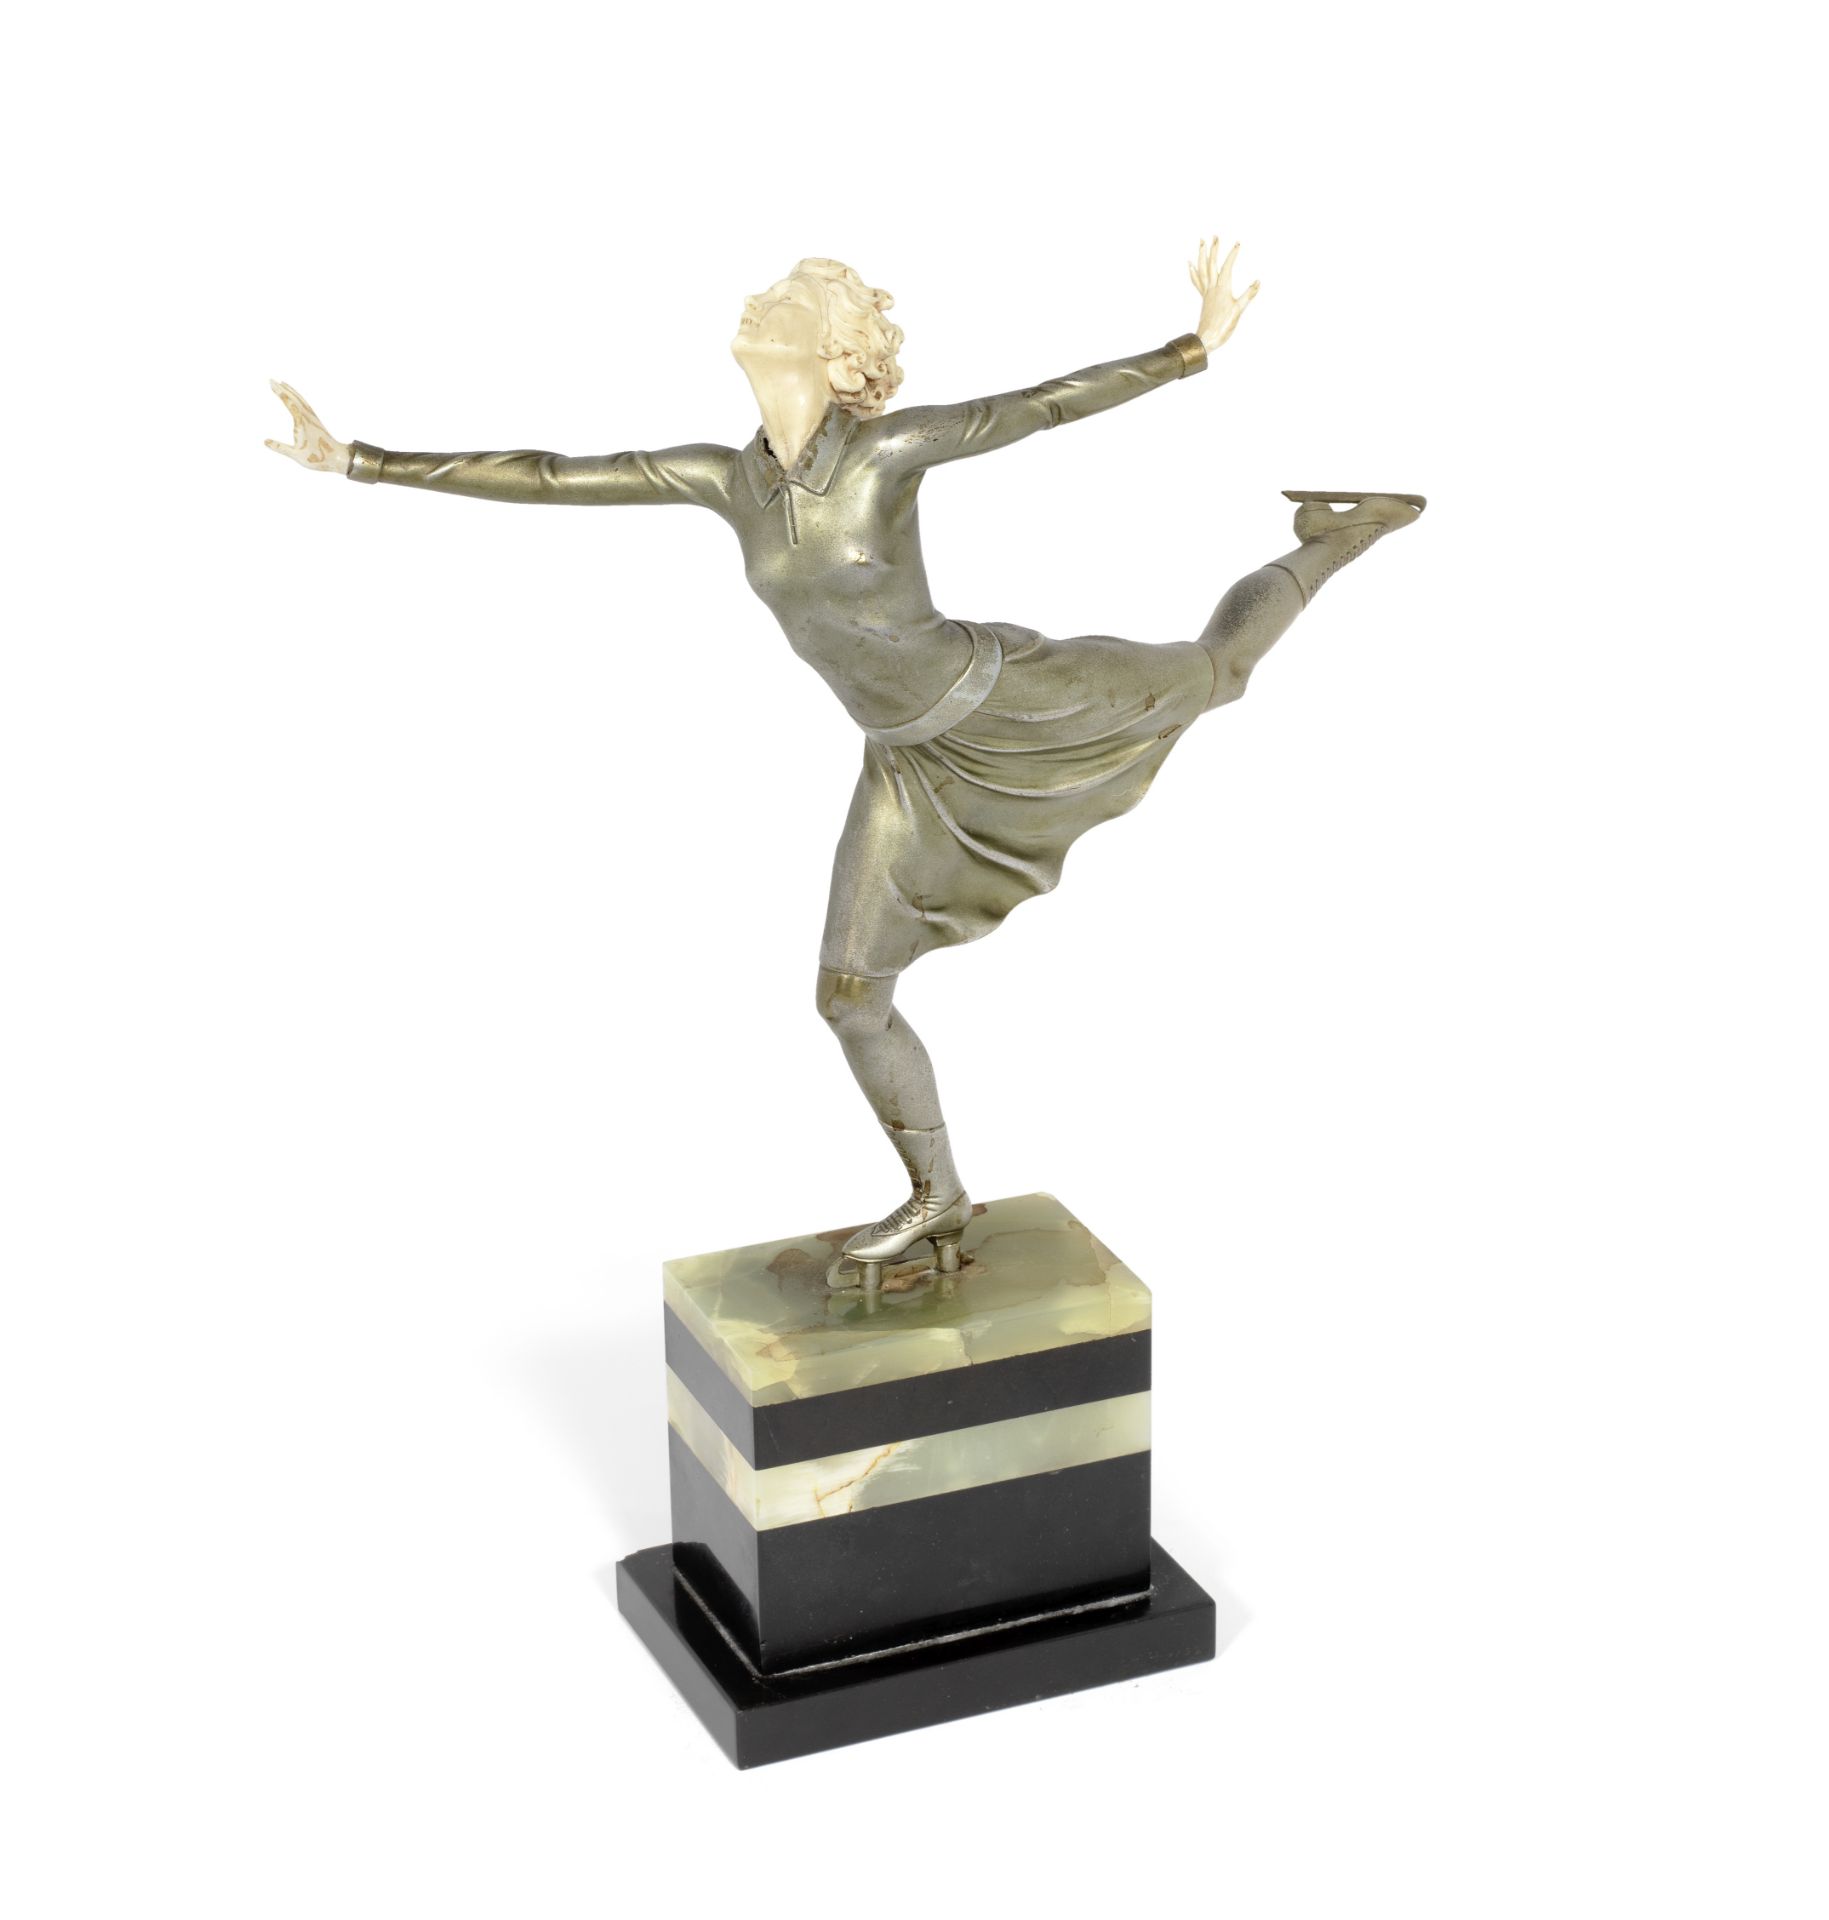 Ferdinand Preiss (German, 1892-1943) 'The Skater': An Art Deco Cold-Painted and Carved Ivory Fi...